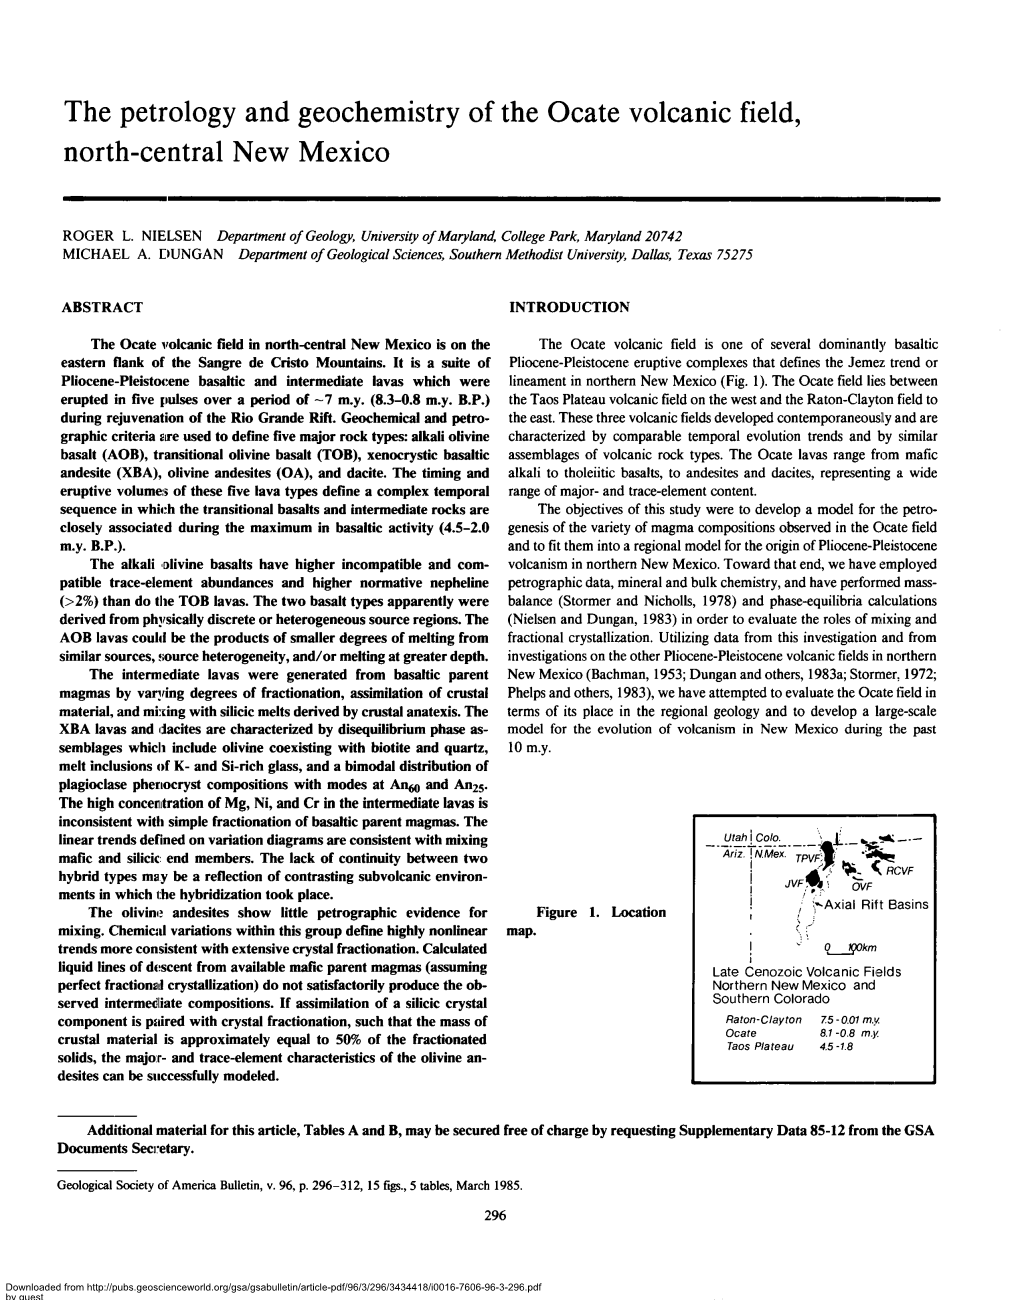 The Petrology and Geochemistry of the Ocate Volcanic Field, North-Central New Mexico